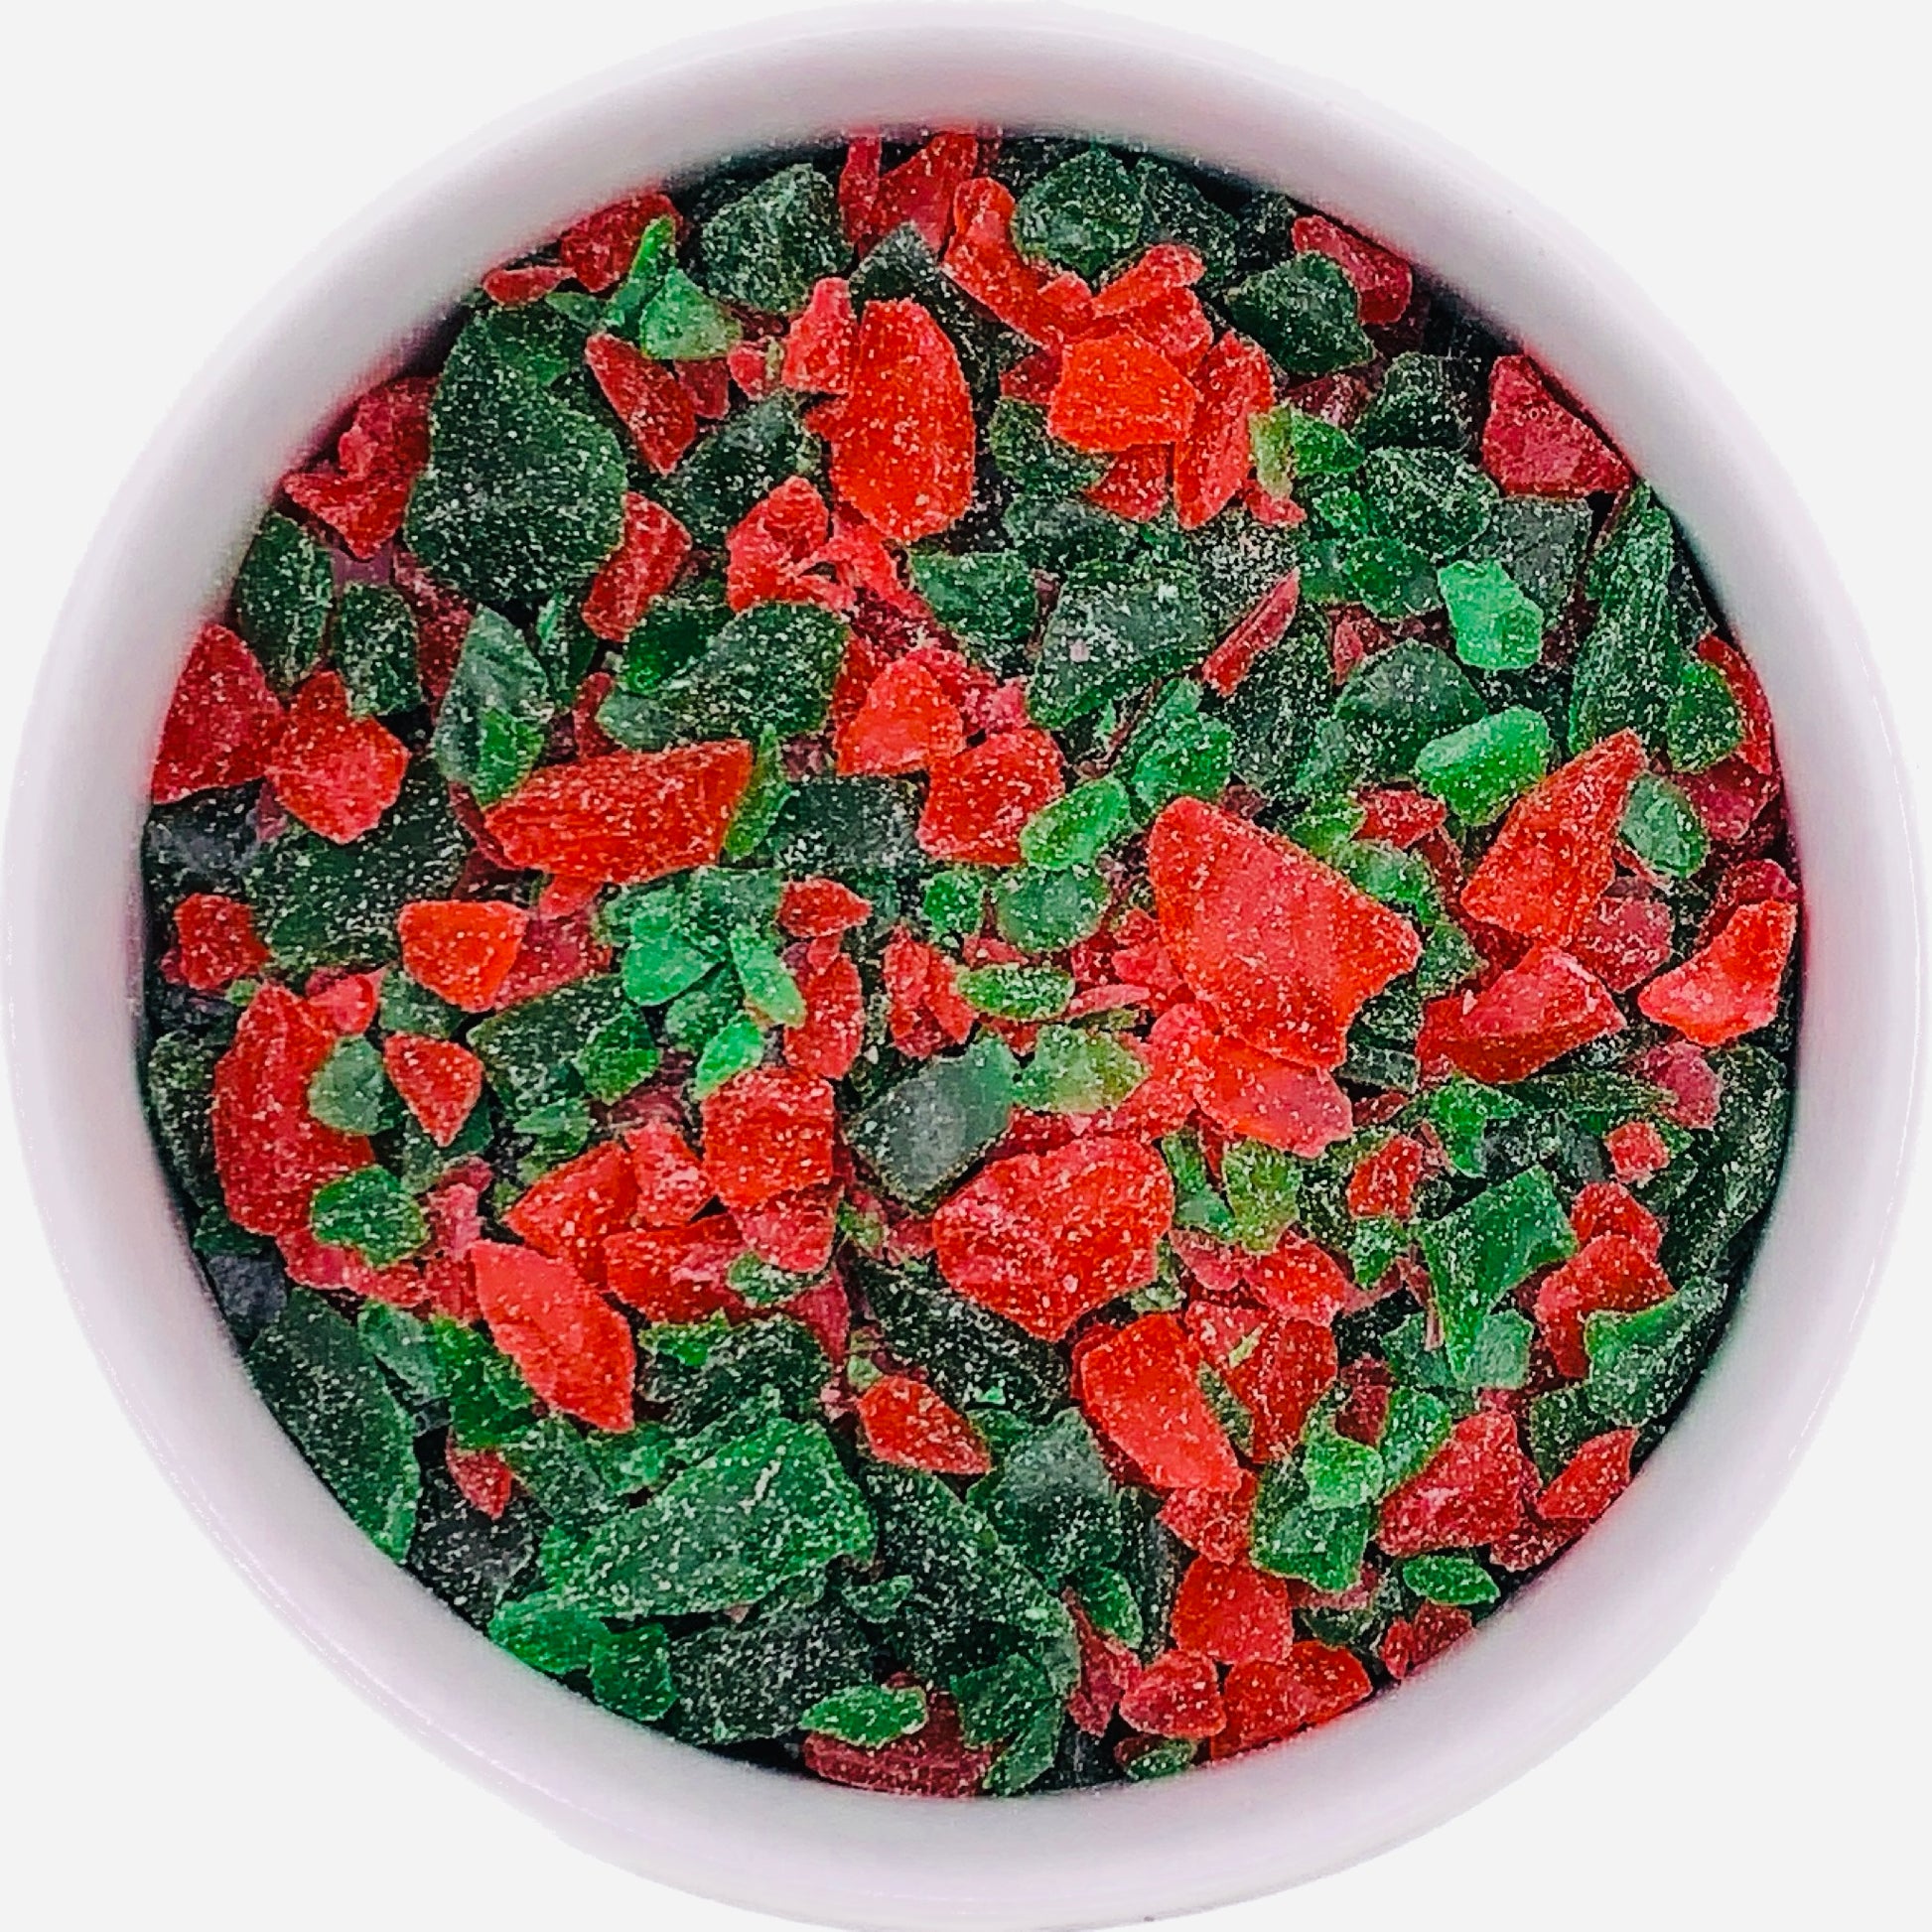 Red and Green Peppermint Ice Crunch